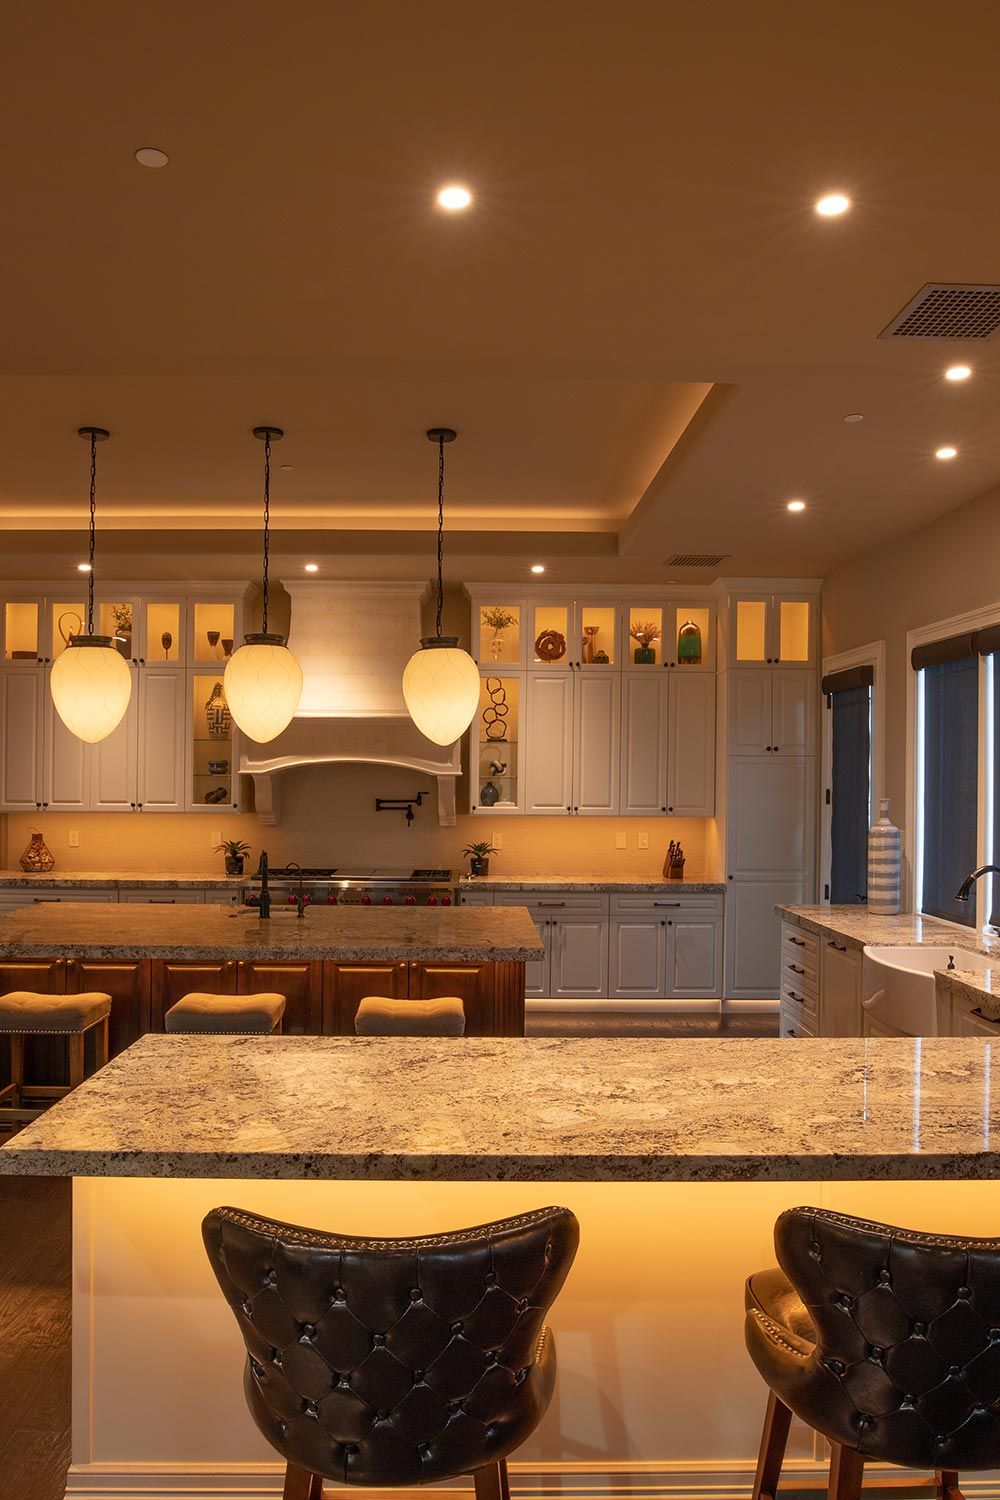 Control4 Vibrant lighting in a modern Kitchen with LED lighting below the counters